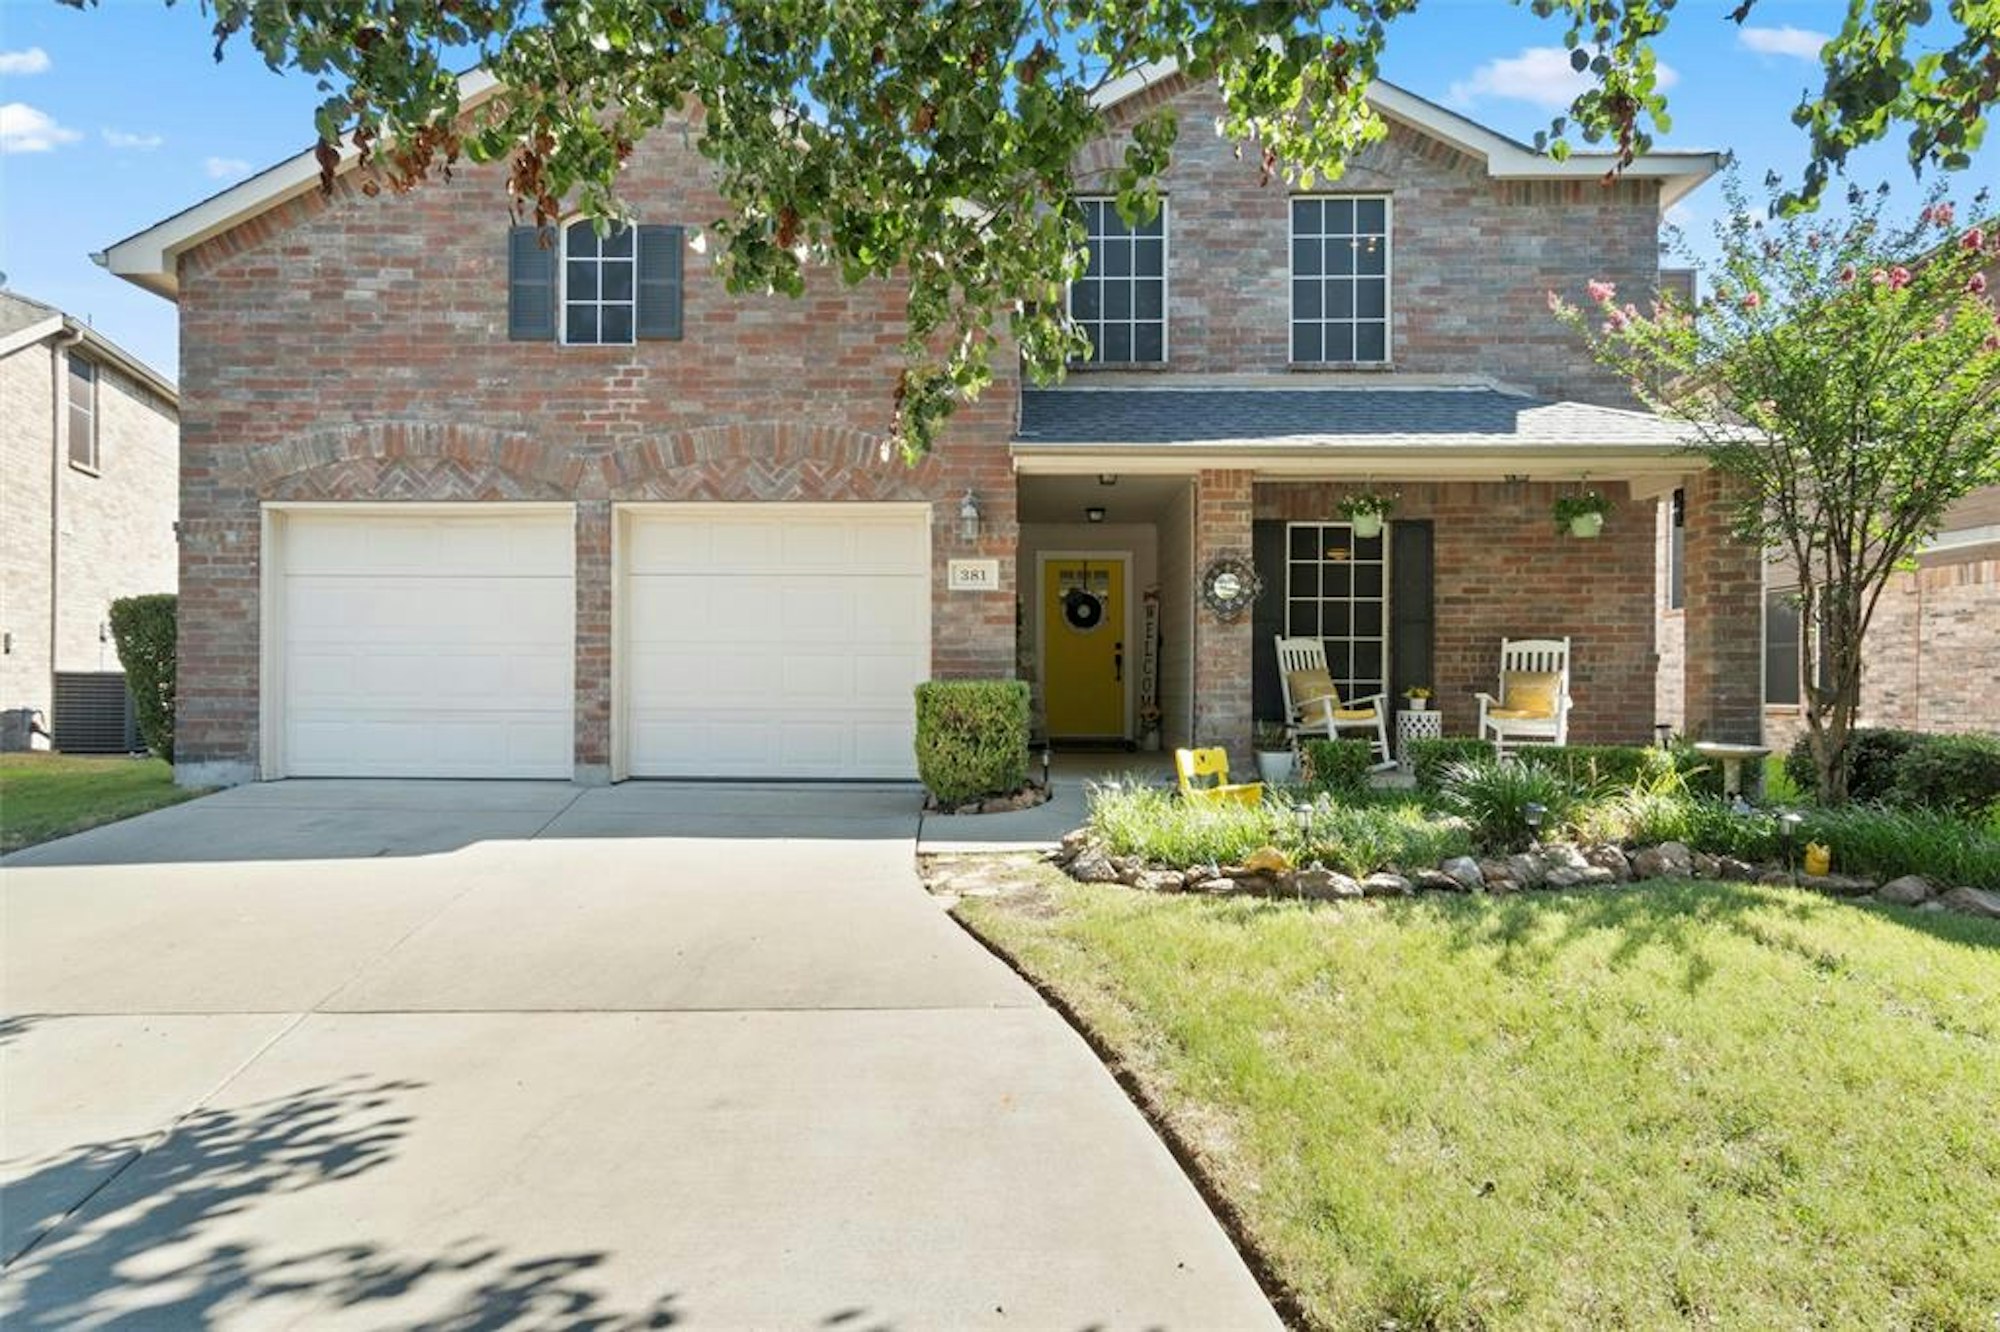 Photo 1 of 27 - 381 Bayberry Dr, Fate, TX 75087